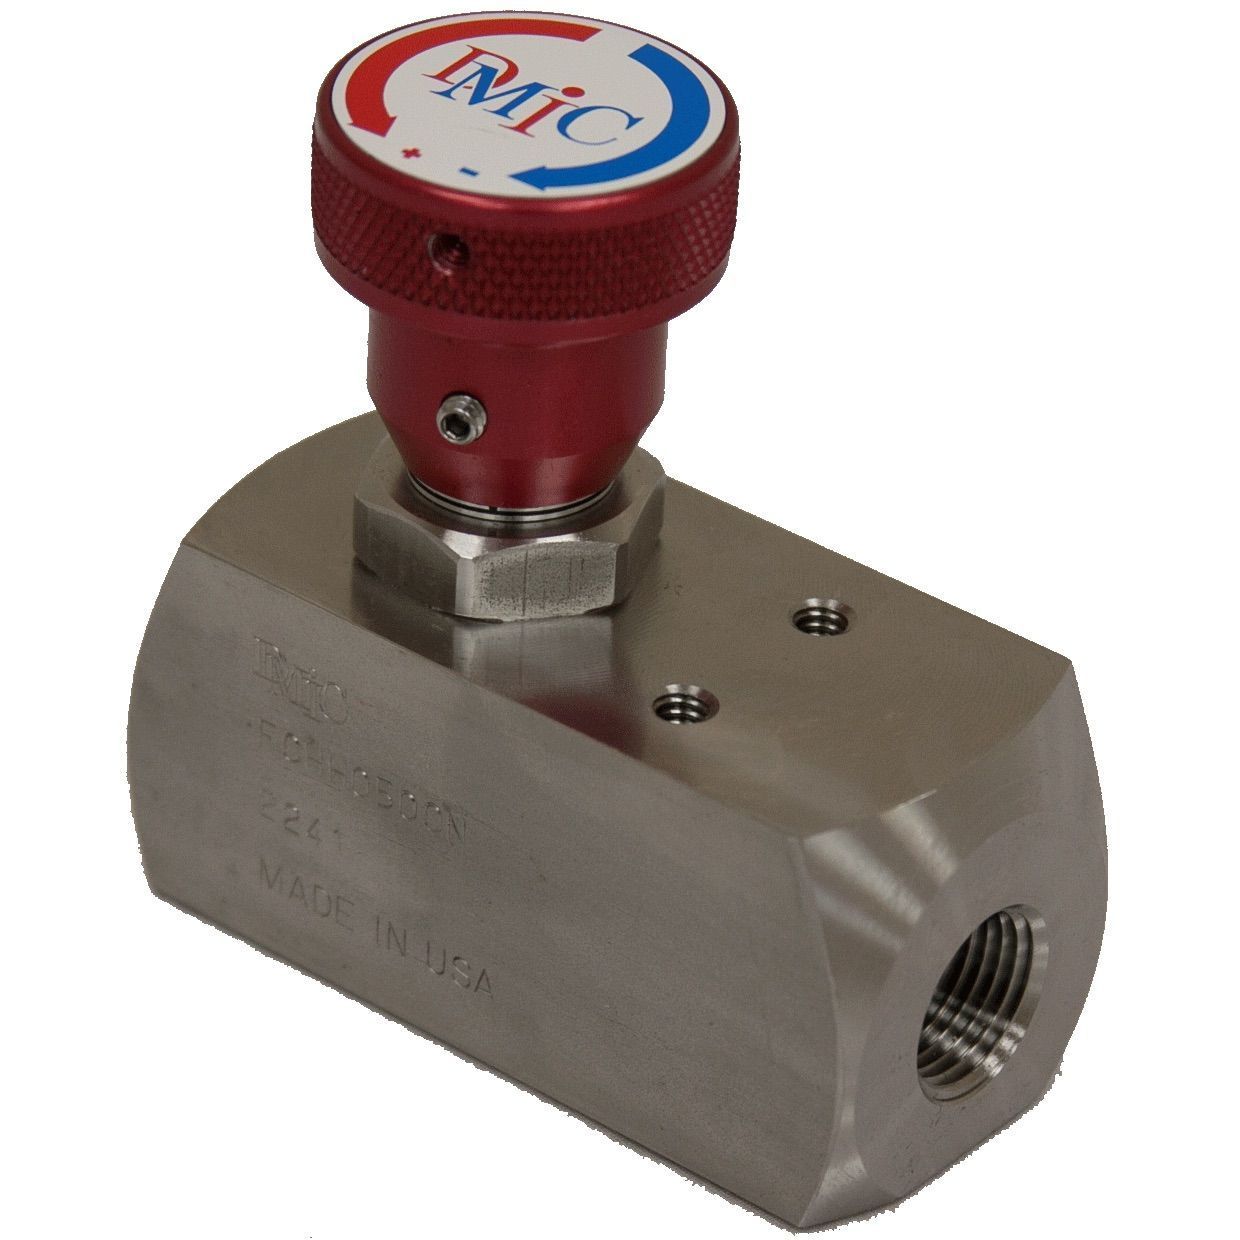 FCHH-0500S-1141 : DMIC Flow Control, Unidirectional, with Integrated Check, #8 SAE (1/2"), Carbon Steel, 10000psi